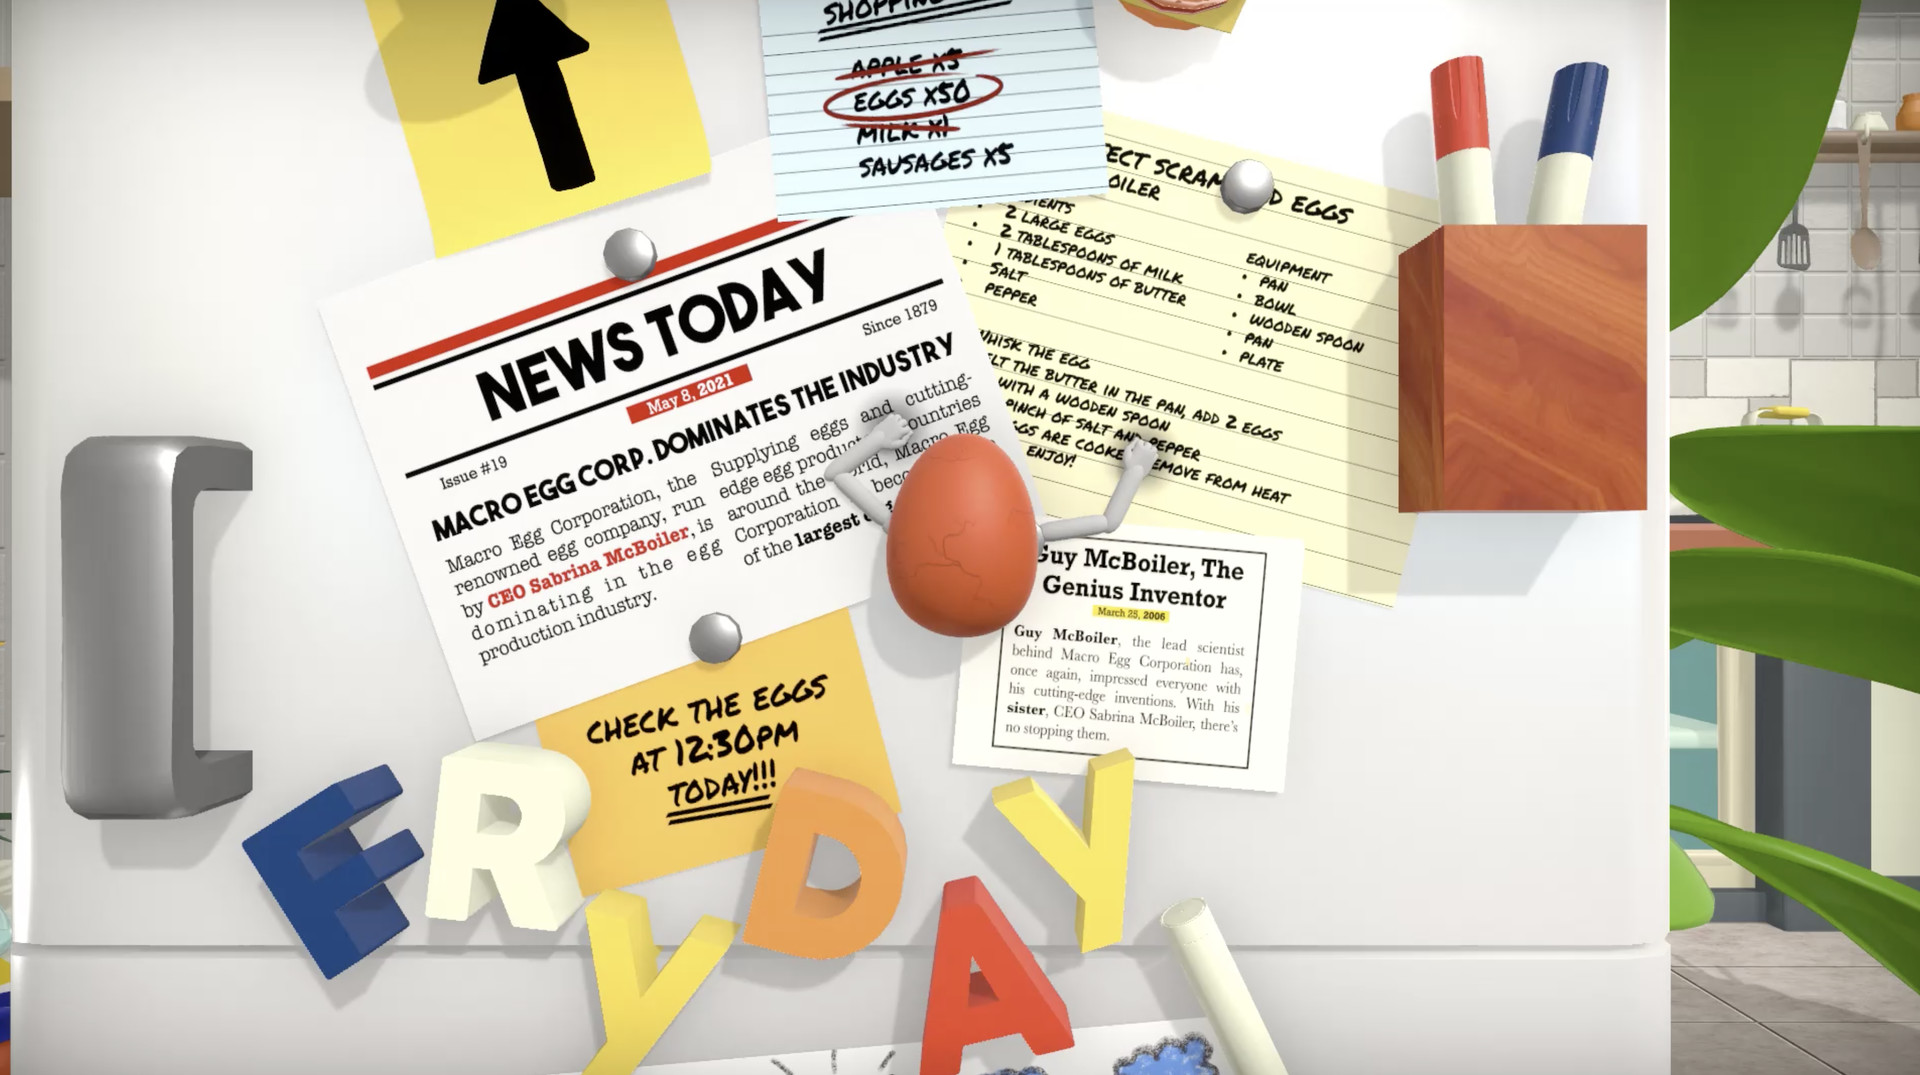 A screenshot from Yolked. A cartoon egg with cartoon arms climbs on papers attached to a white fridge.